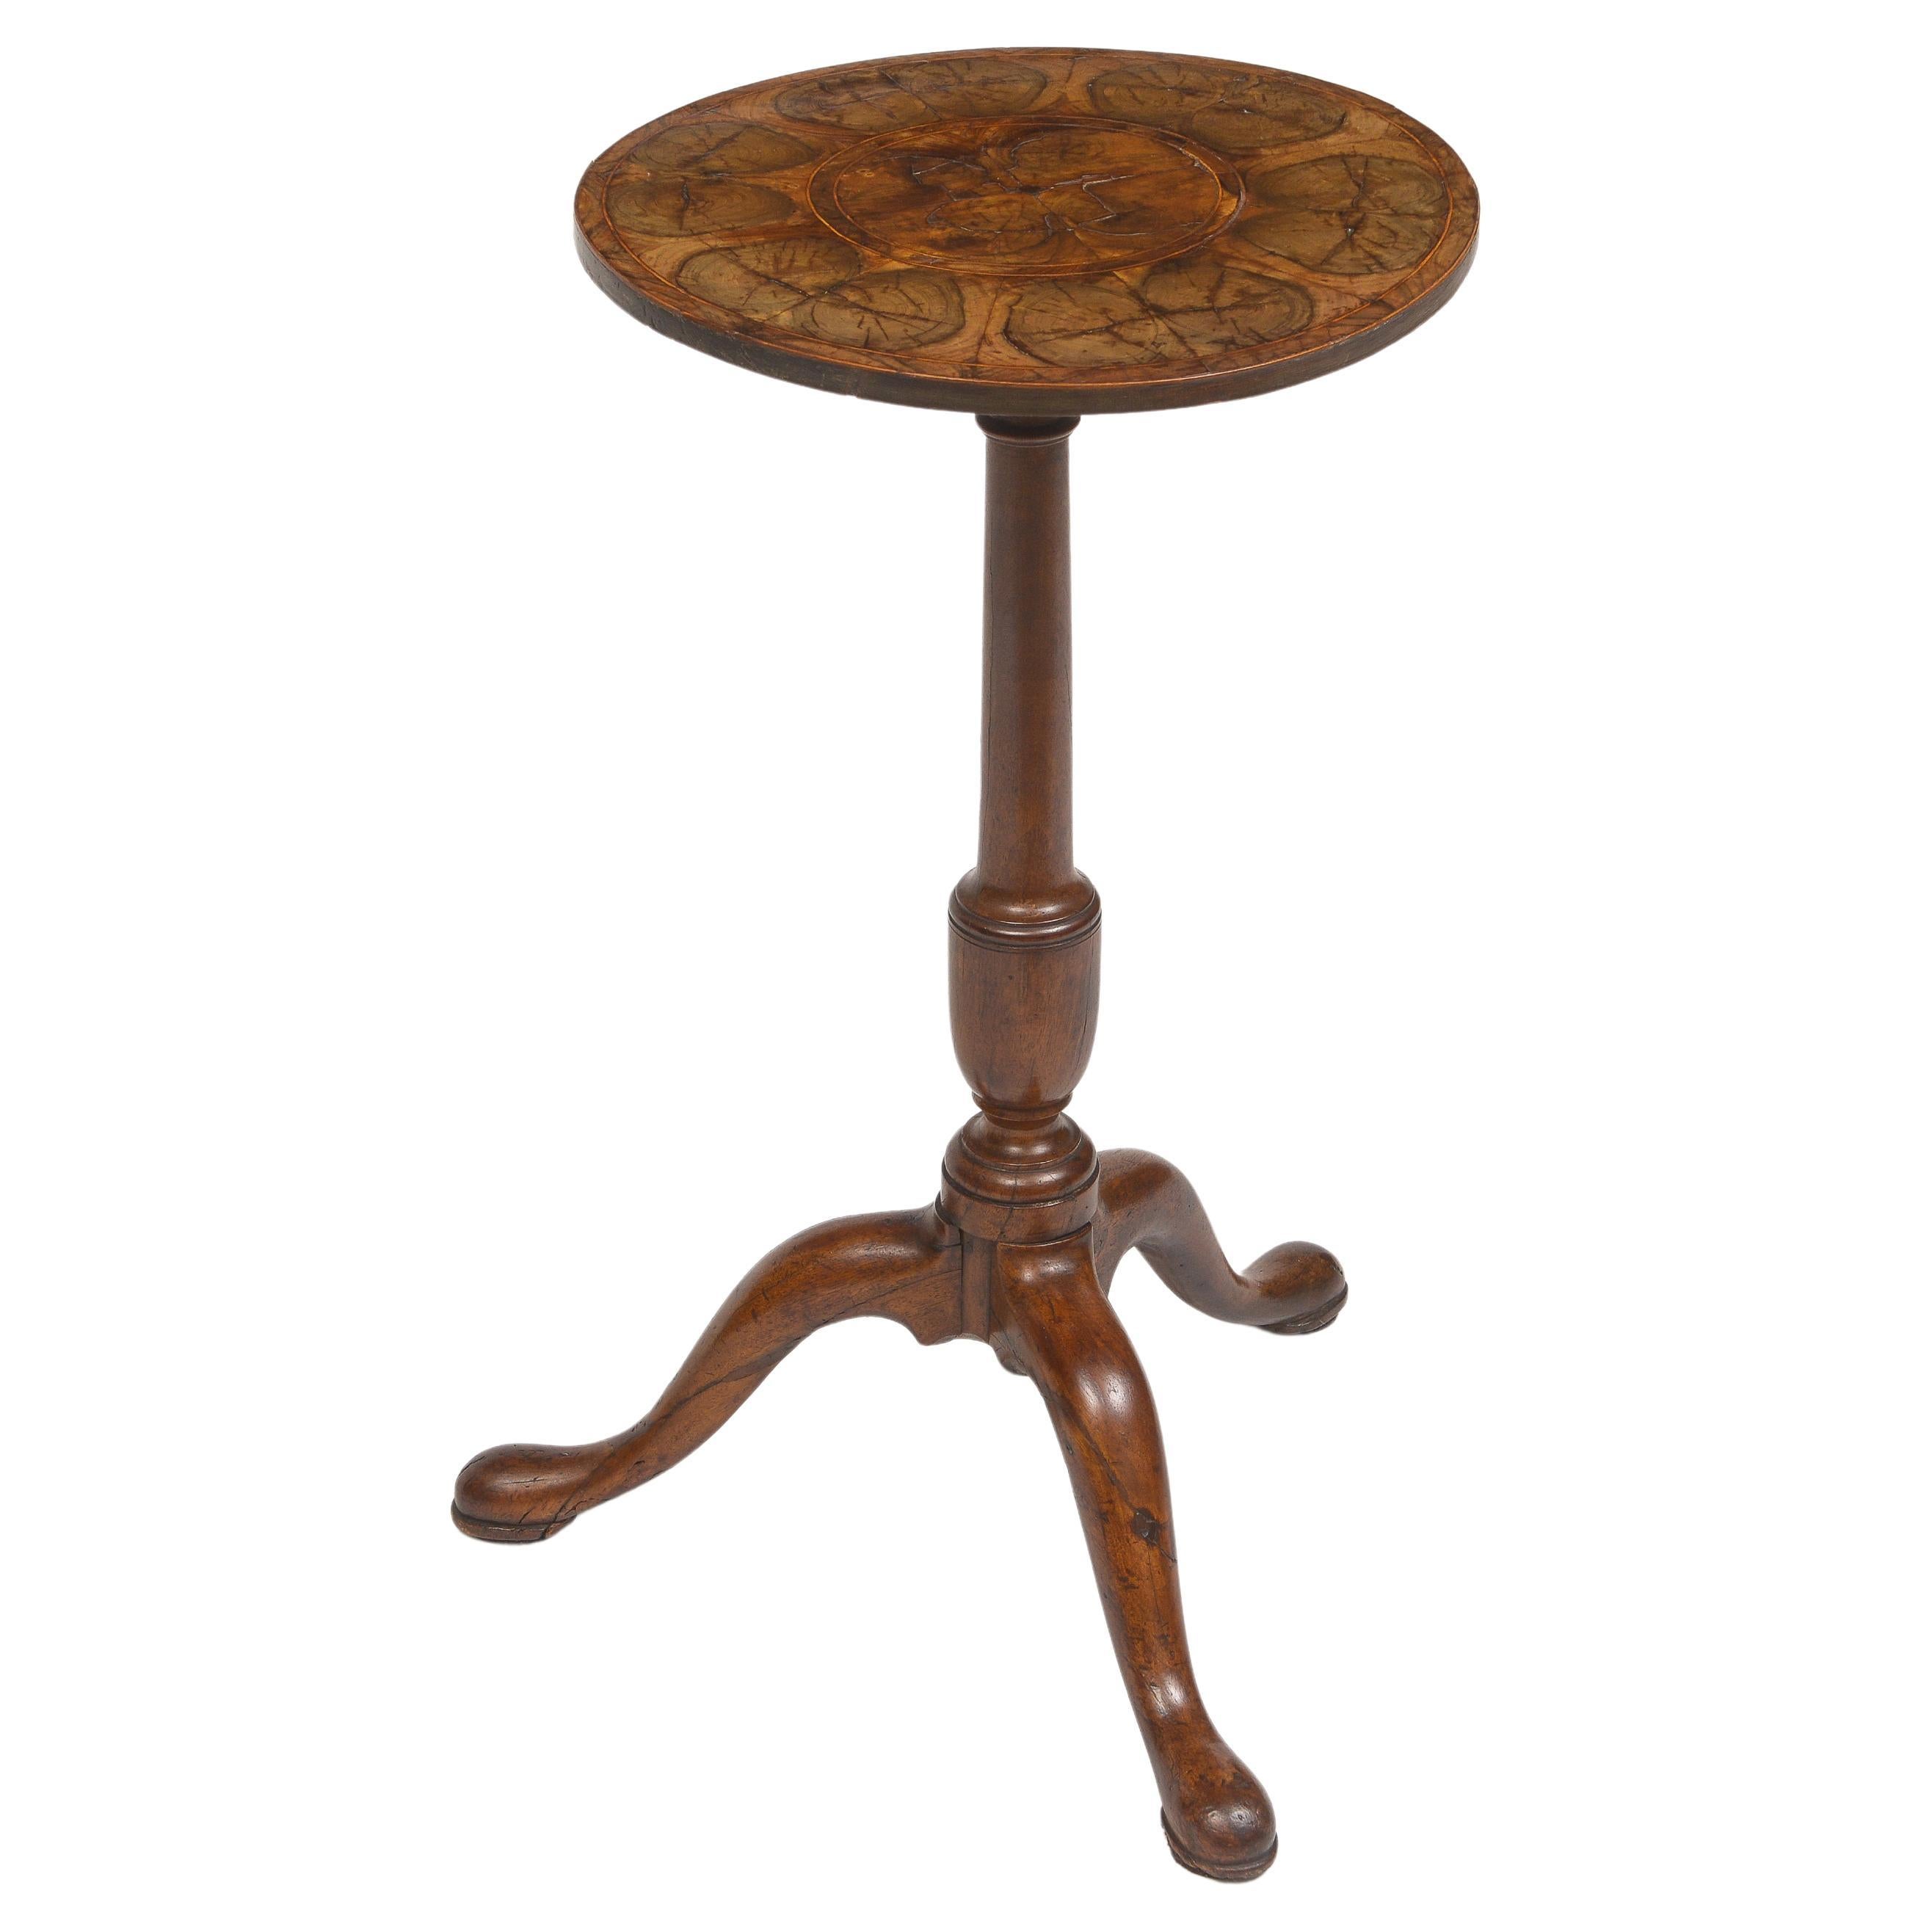 Early 18th Century Oyster Wood Tip Tripod Table